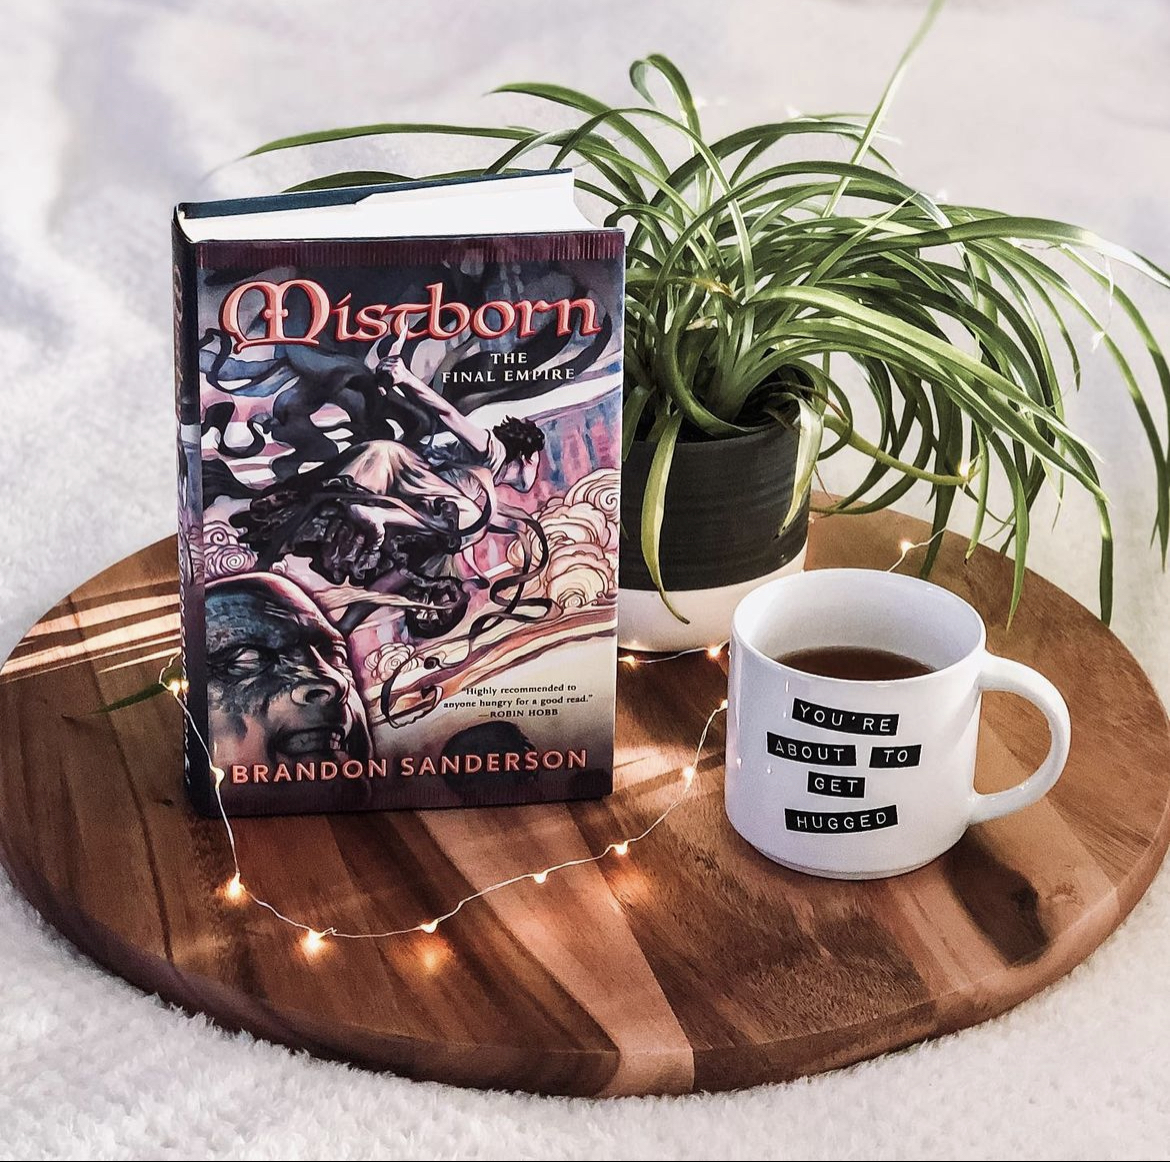 Photo of Mistborn on wooden circle with plant and coffee